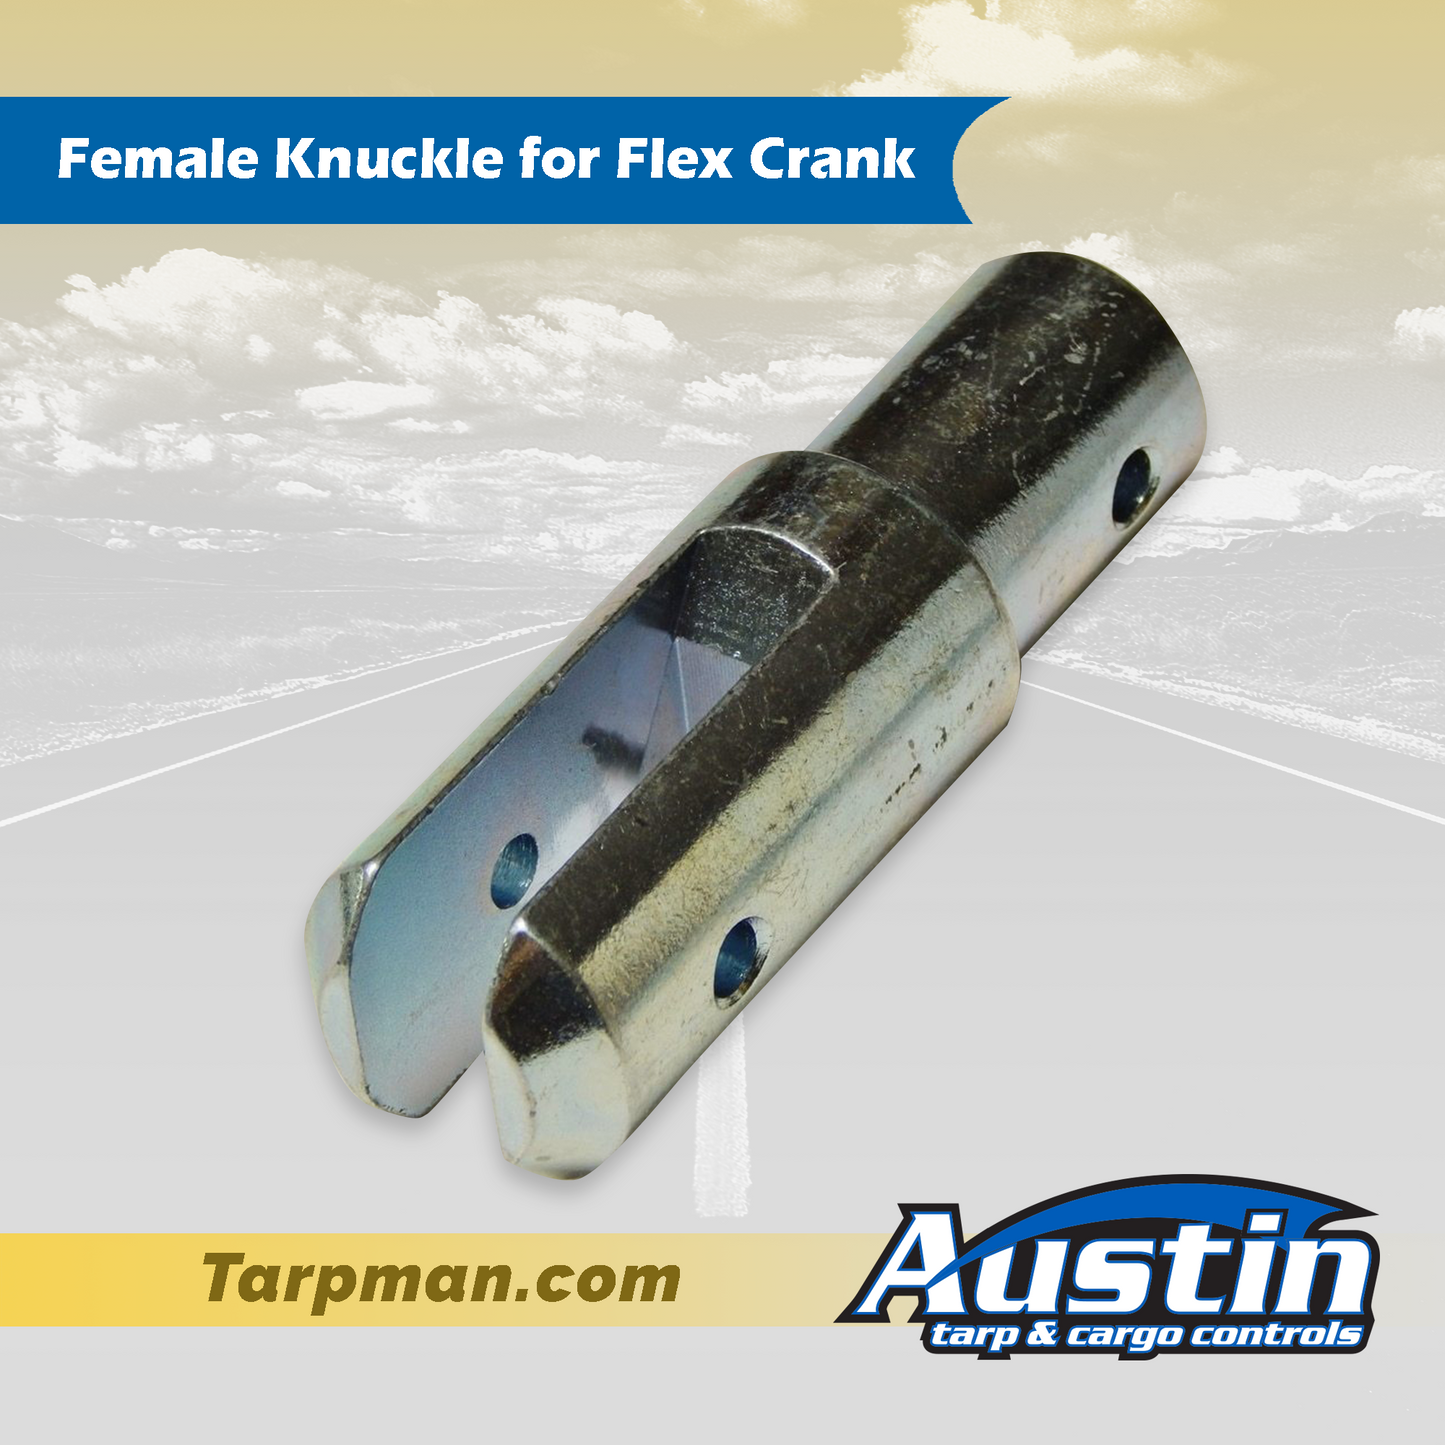 Female Knuckle for Flex Crank